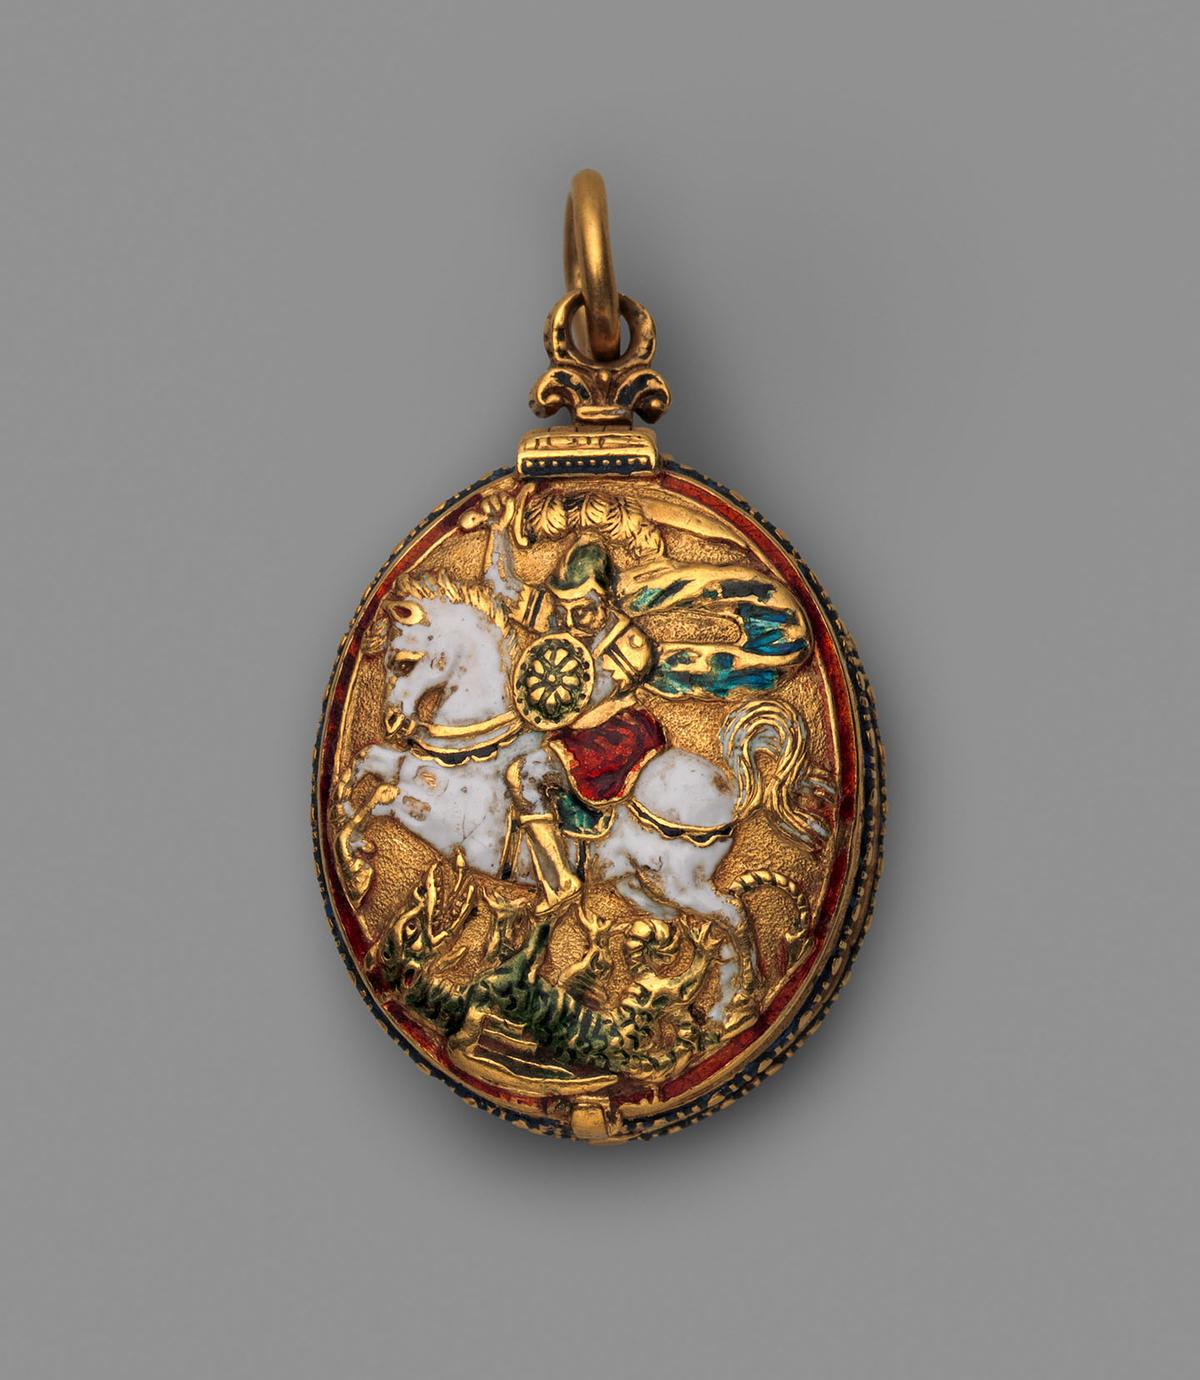 "Watch in the form of a badge of the Order of the Garter," circa 1600, by Nicholas Vallin. Gold case and dial with gilded brass and steel movement; 1 7/16 inches by 15/16 inches. The Metropolitan Museum of Art, New York City. (Public Domain)